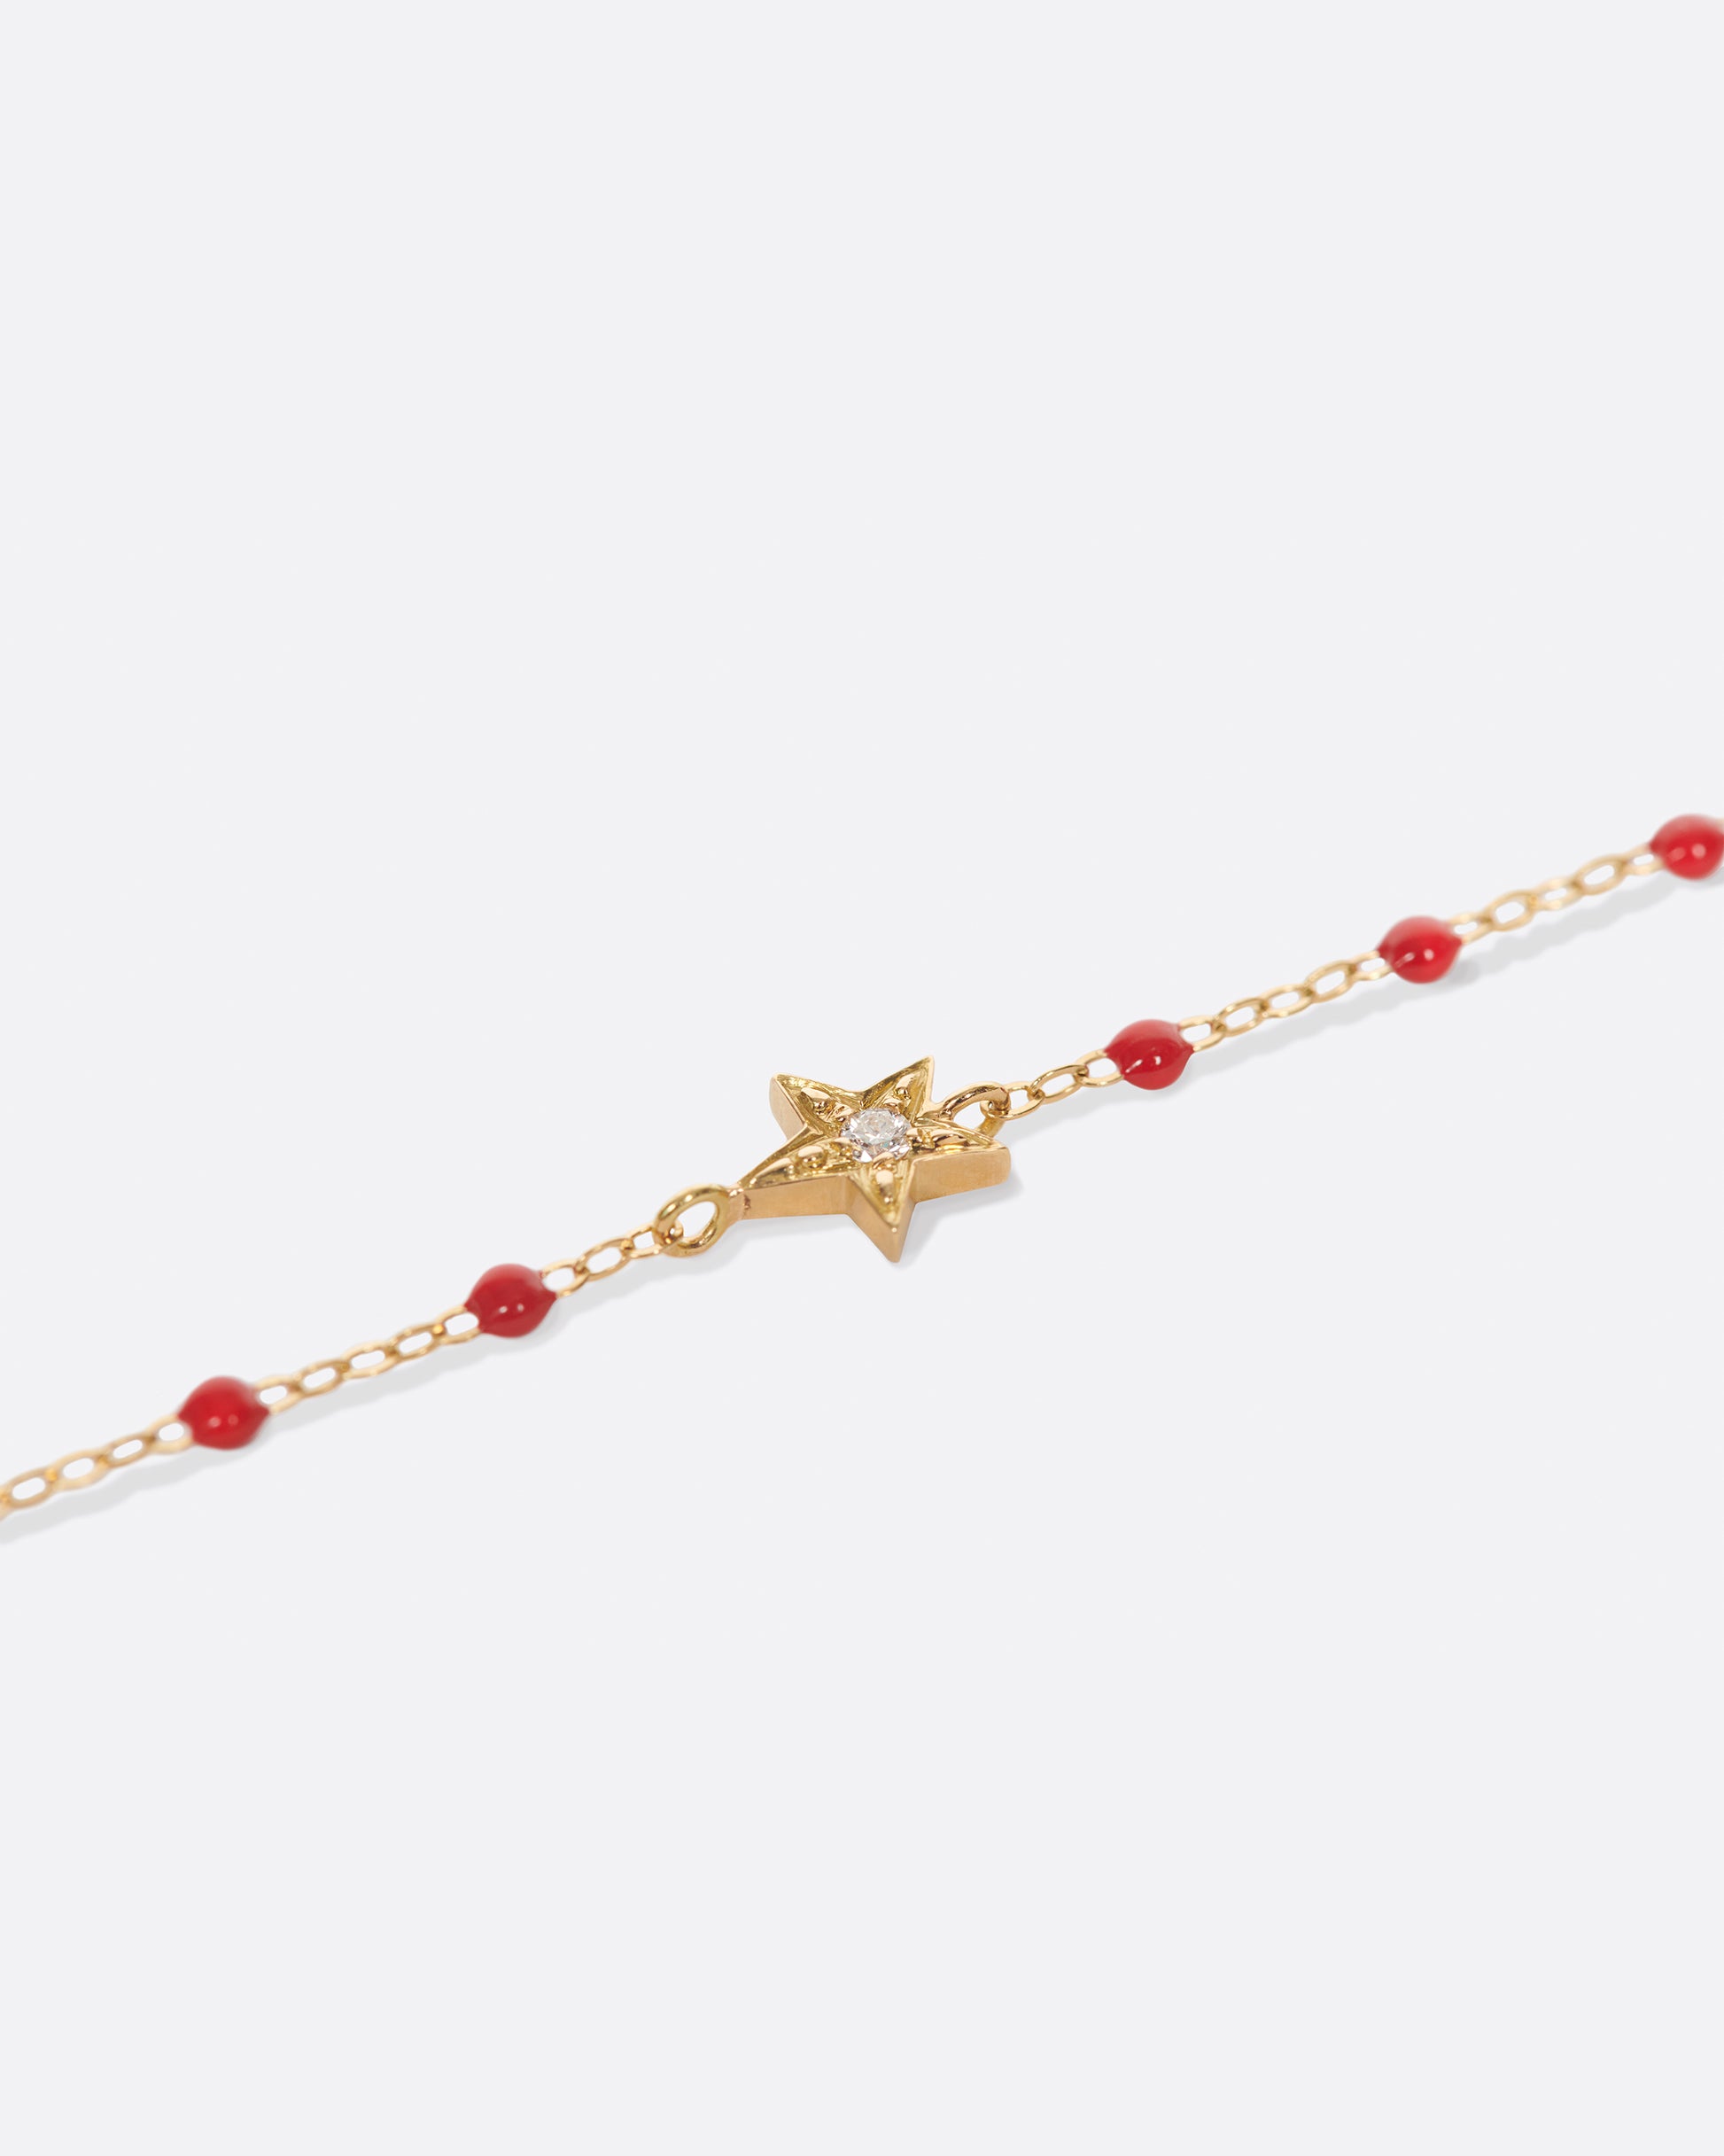 A classic Gigi Clozeau bracelet with poppy red resin and a five point star at its center.